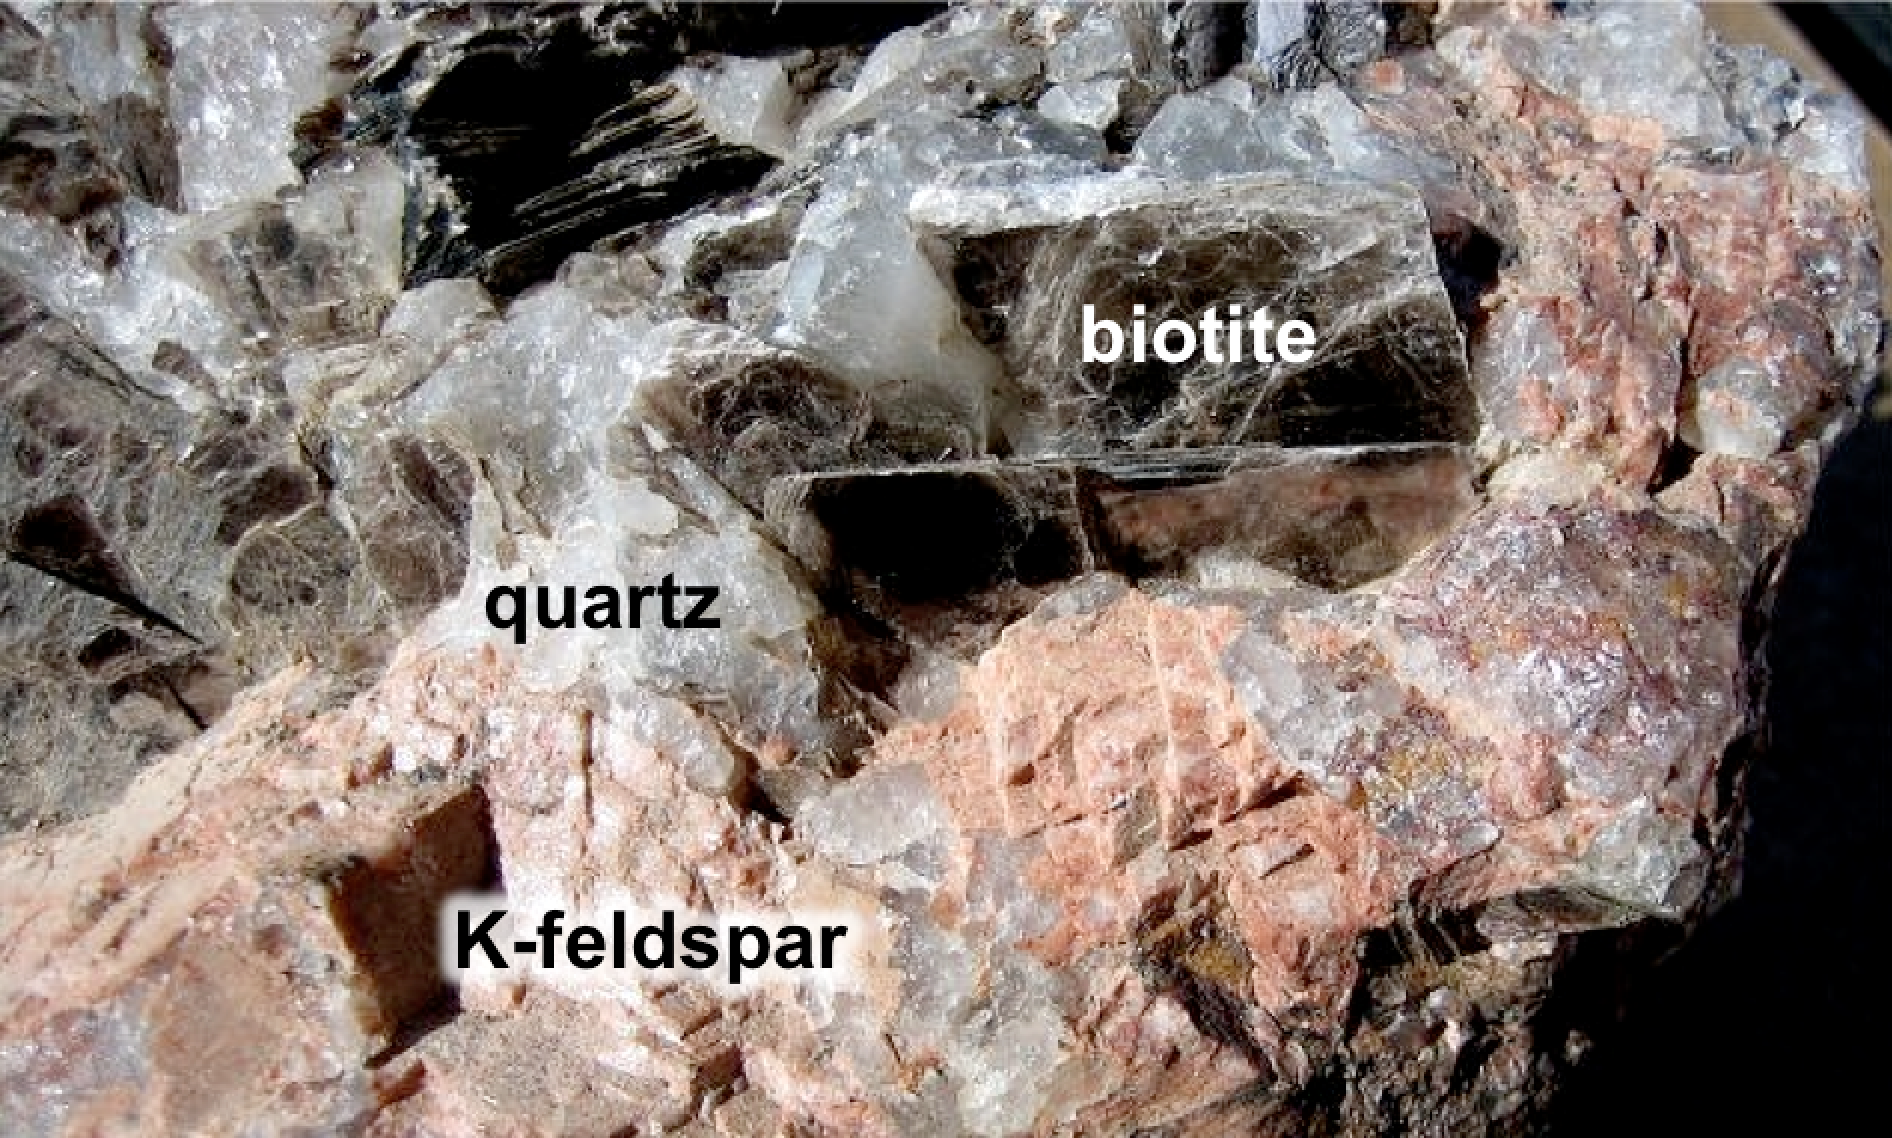 This close-up view of the igneous rock pegmatite shows black biotite crystals, colourless quartz crystals, and pink potassium feldspar crystals. Crystals are mm to cm in scale.